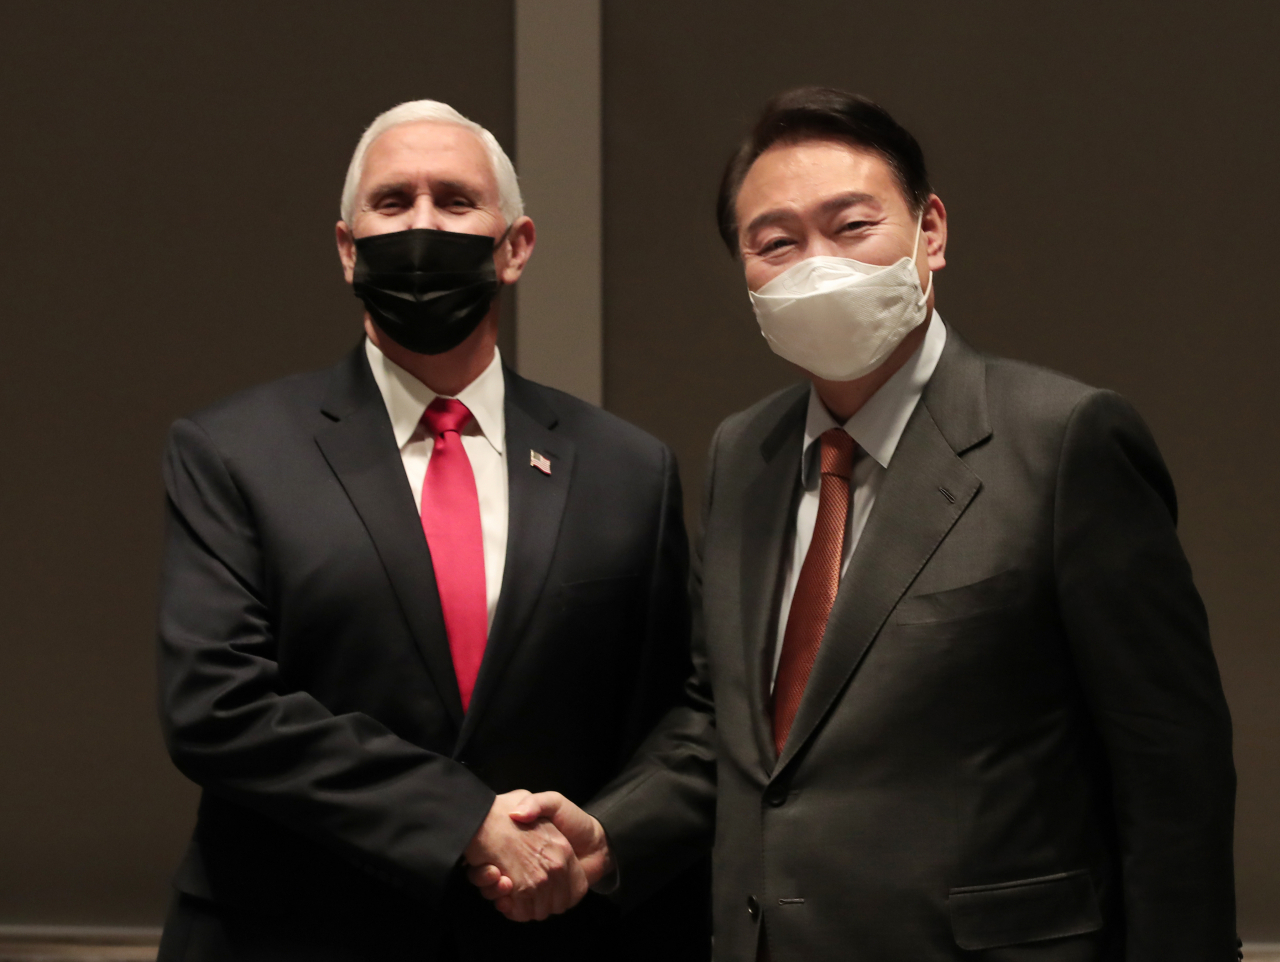 In this photo provided by the main opposition People Power Party (PPP), Yoon Suk-yeol (R), the presidential candidate of the conservative PPP and former US Vice President Mike Pence shake hands before a meeting in Seoul on Sunday. (PPP)